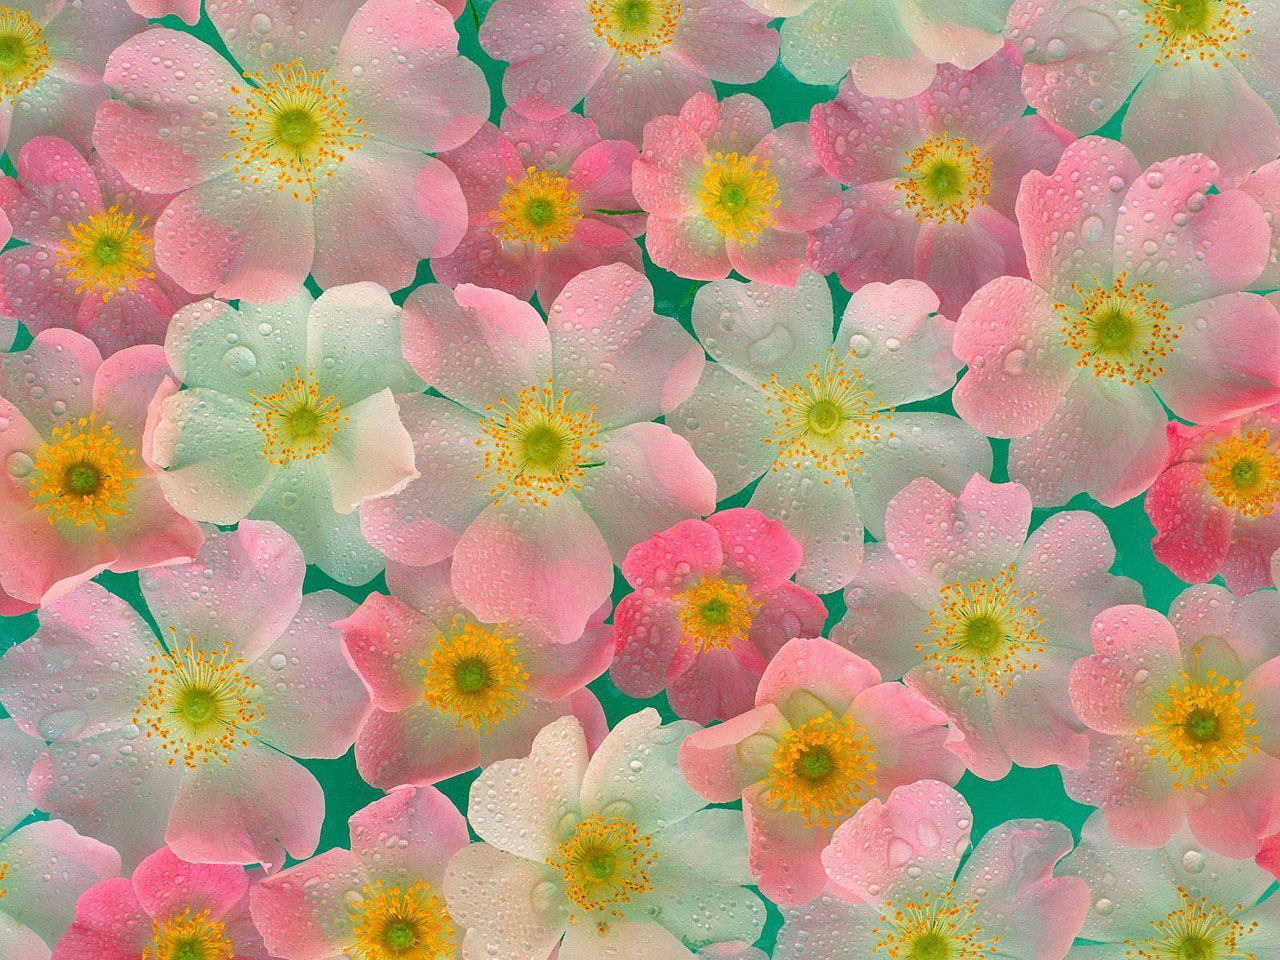 25 Beautiful Flower Wallpapers for your